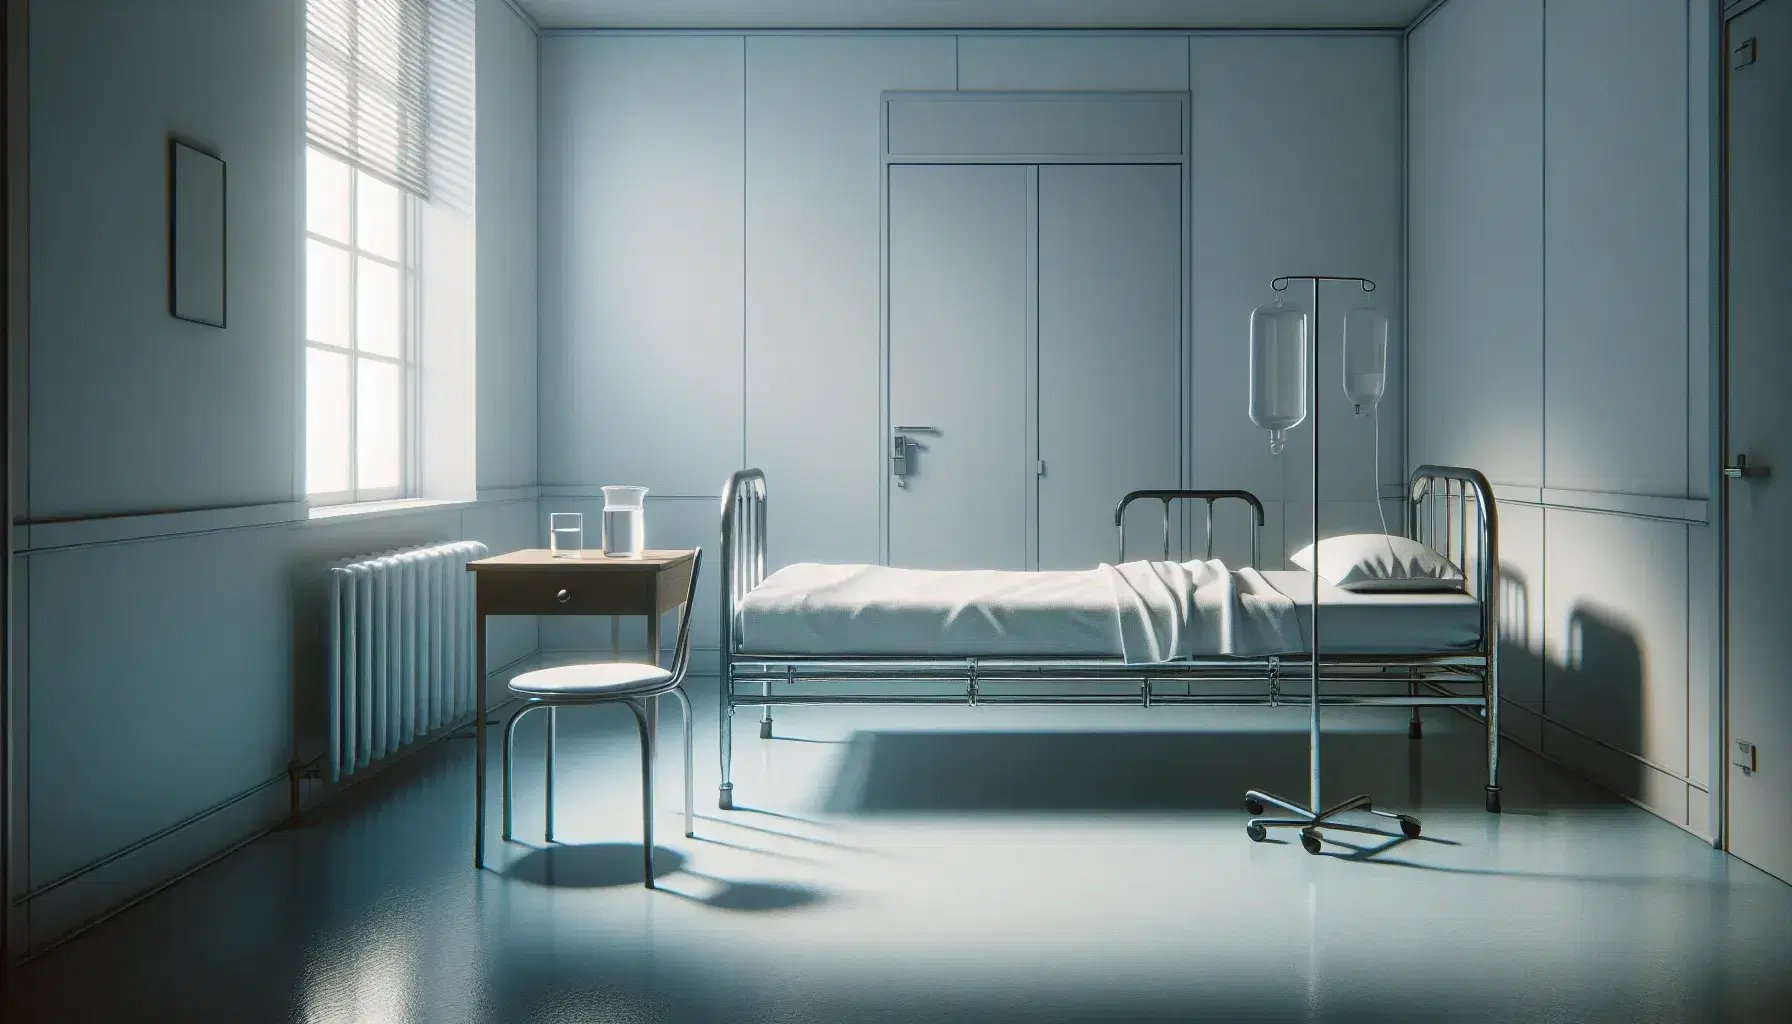 Aseptic hospital room with metal bed, white sheets, small table with glass of water and jug, chair with blue cushion, closed door.